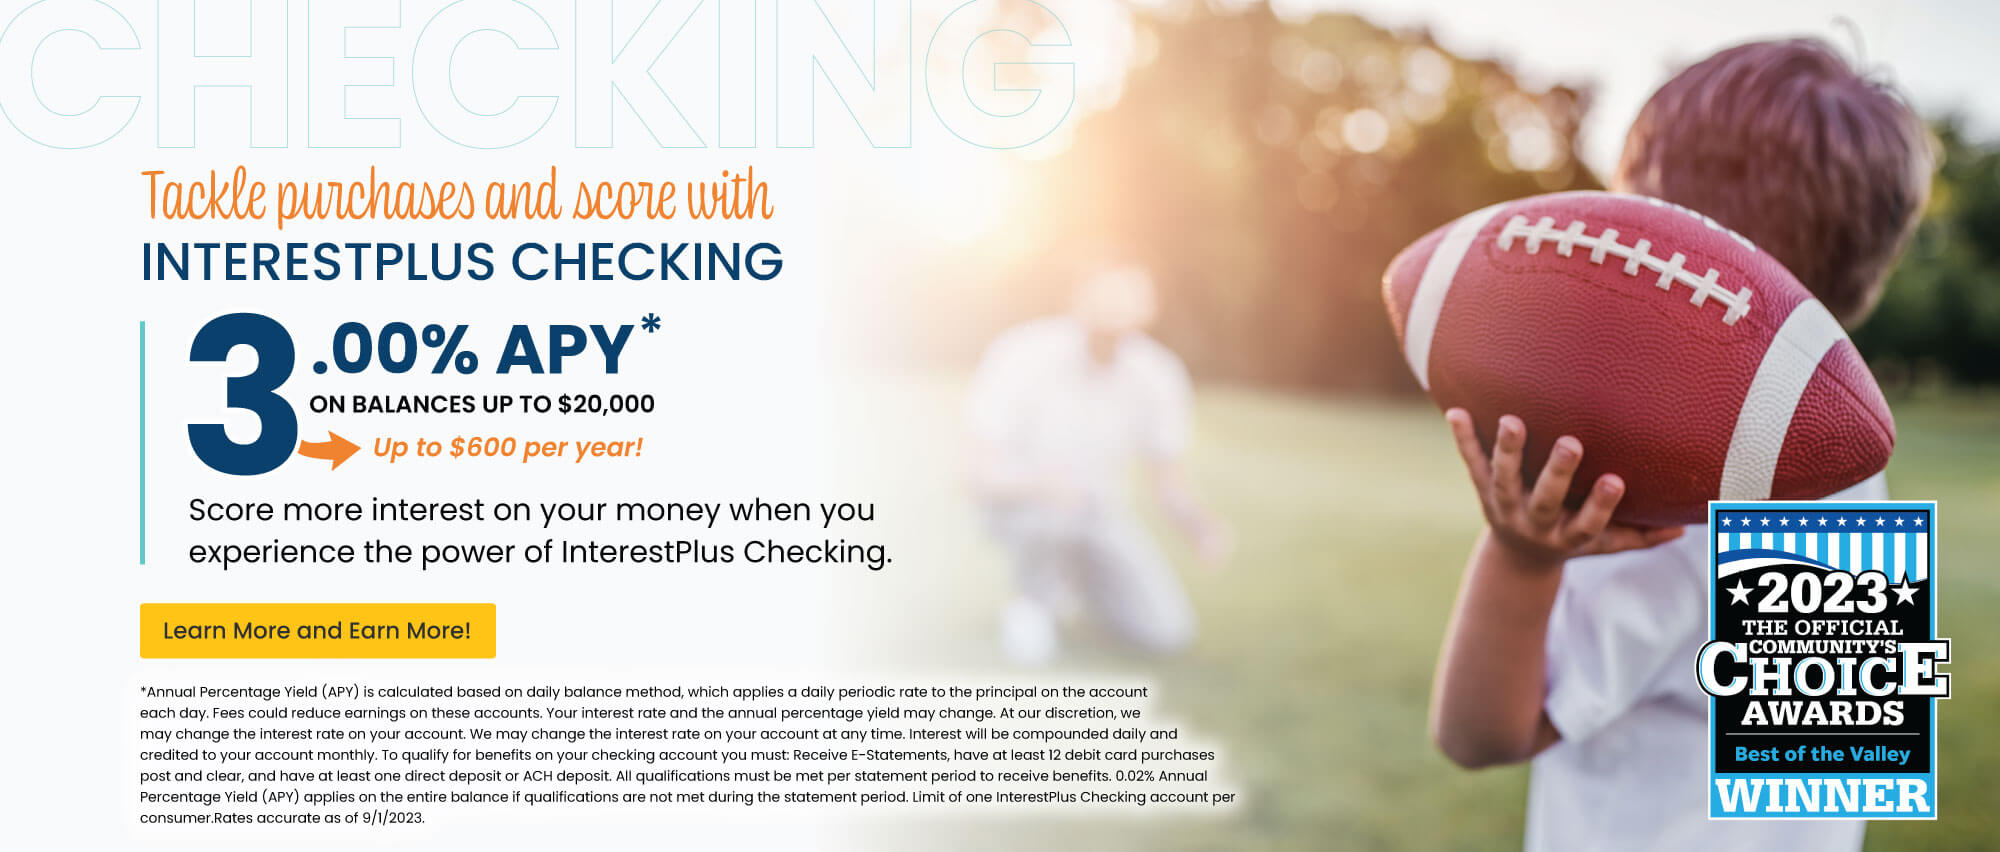 With InterestPlus Checking, score more interest when you #bankwithBLC. 3.00% APY on balances up to $20,000 InterestPlus Checking. That's up to $600 per year! Learn more and earn more!